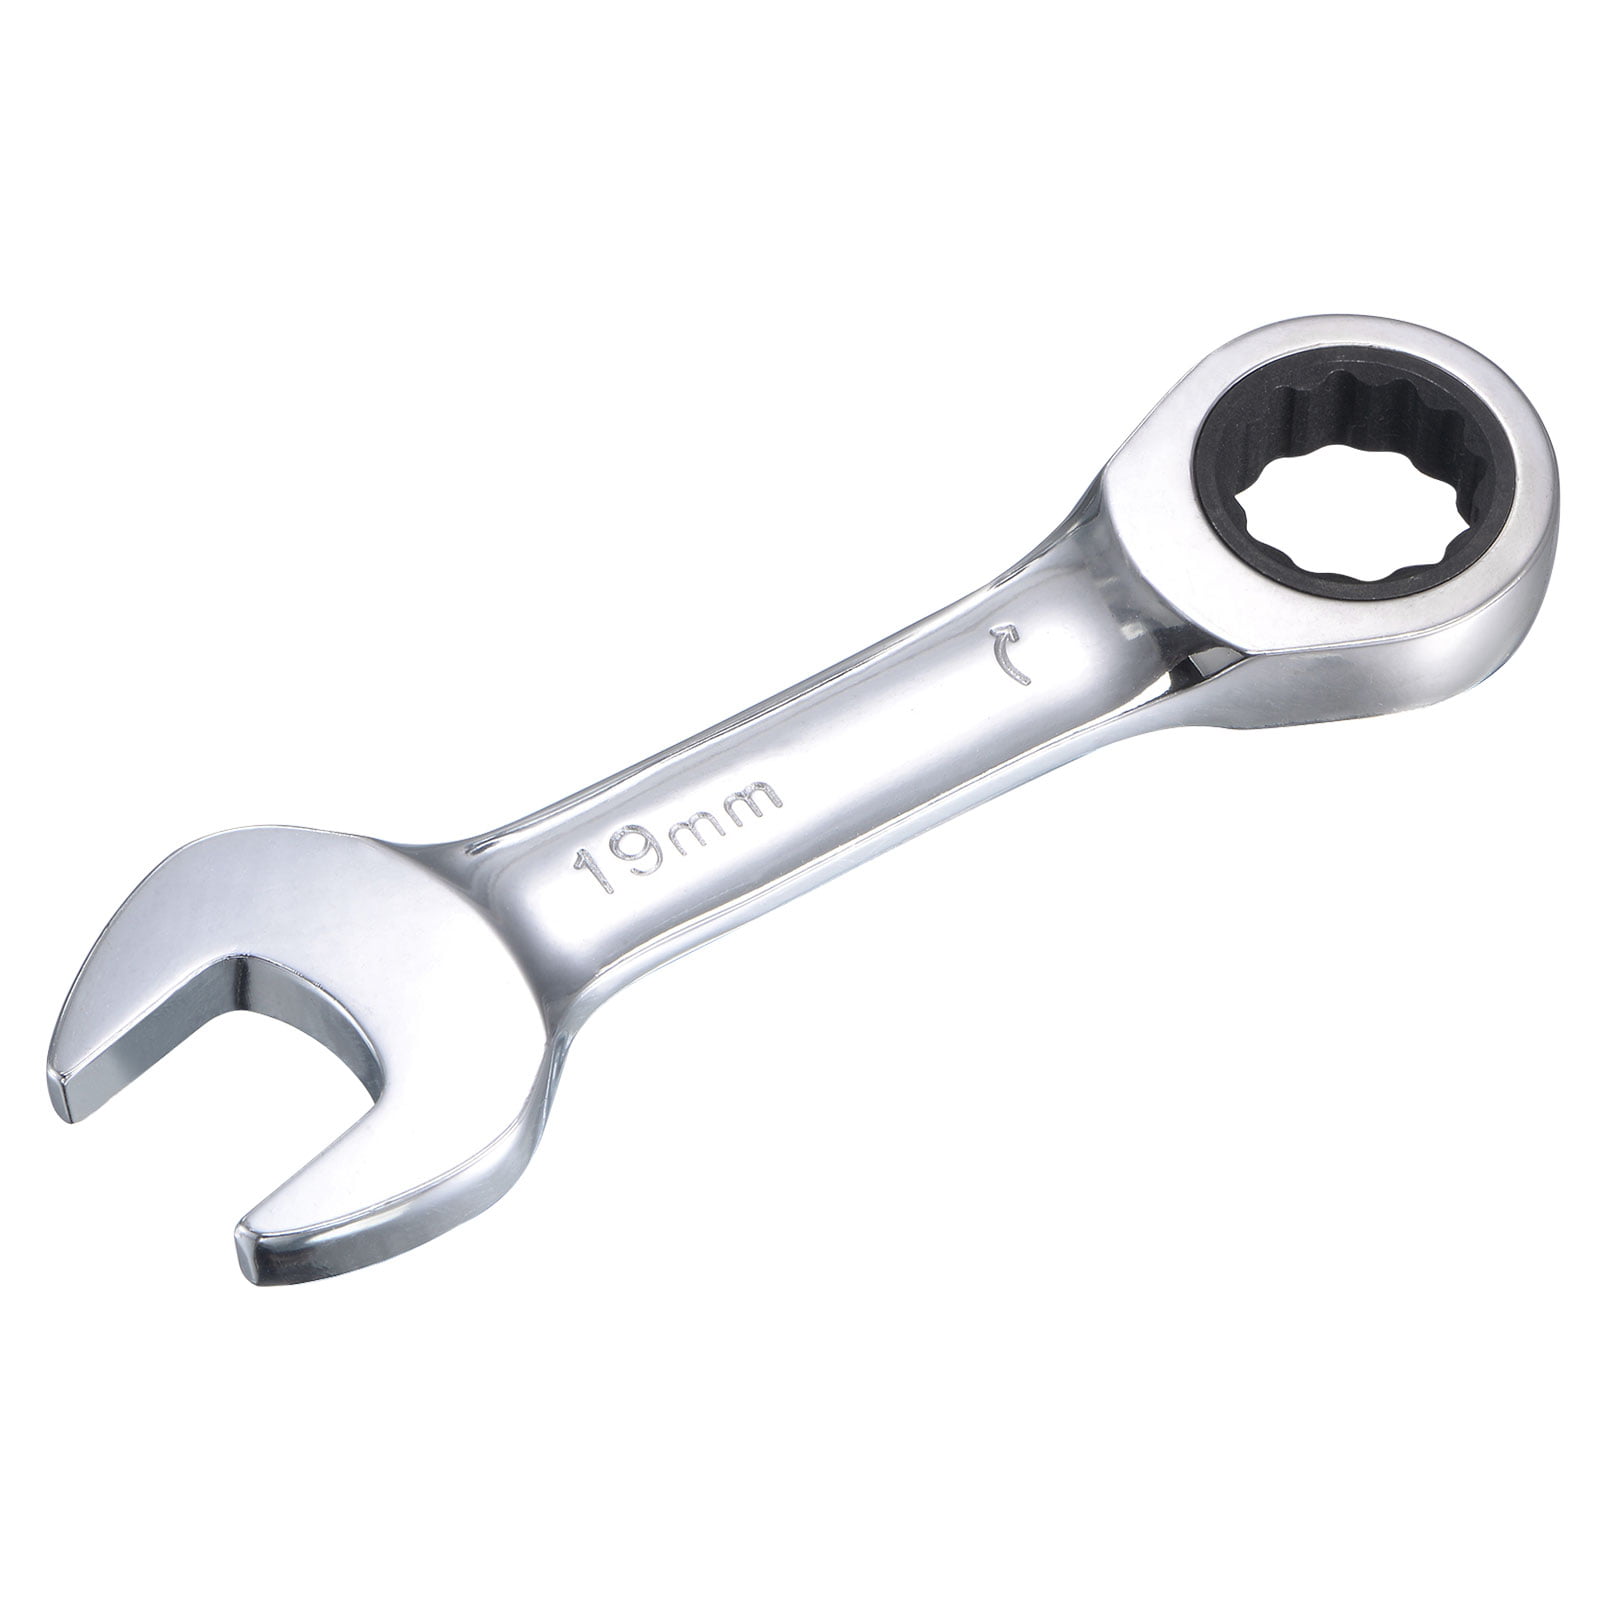 22mm Flex-Head Ratcheting Combination Wrench Metric 72 Teeth 12 Point Box Ended 